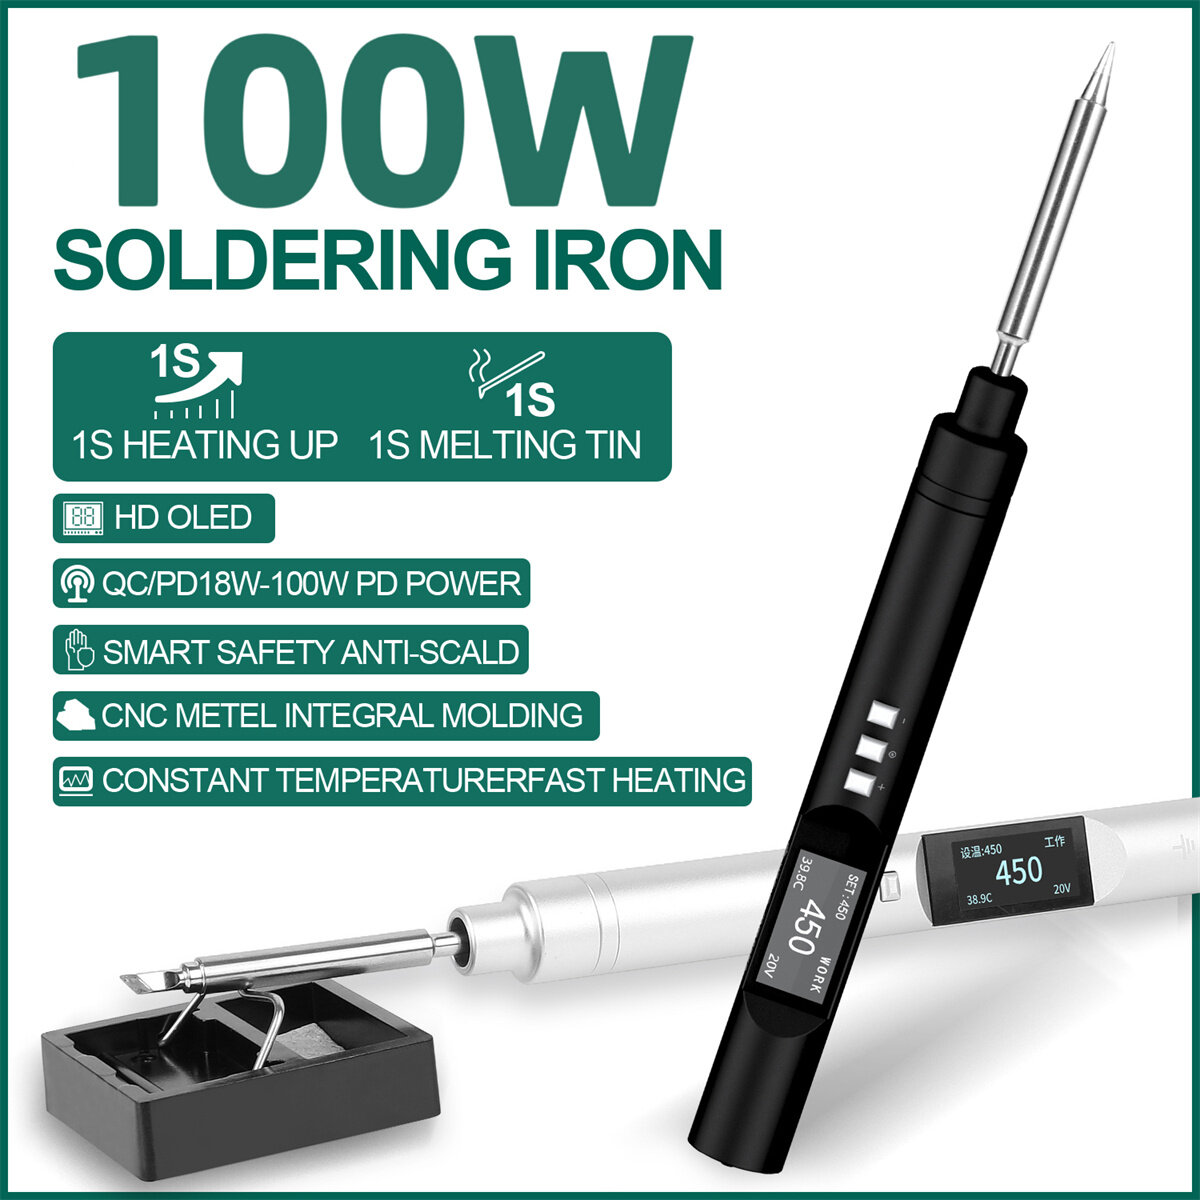 Drillpro PTS200 V2 100W Electric Soldering Iron Portable Quick Warm-Up Tin Melting Open Source Supports PD3.0 Firmware Upgradeable Battery Not Included T12/TS100 Compatible